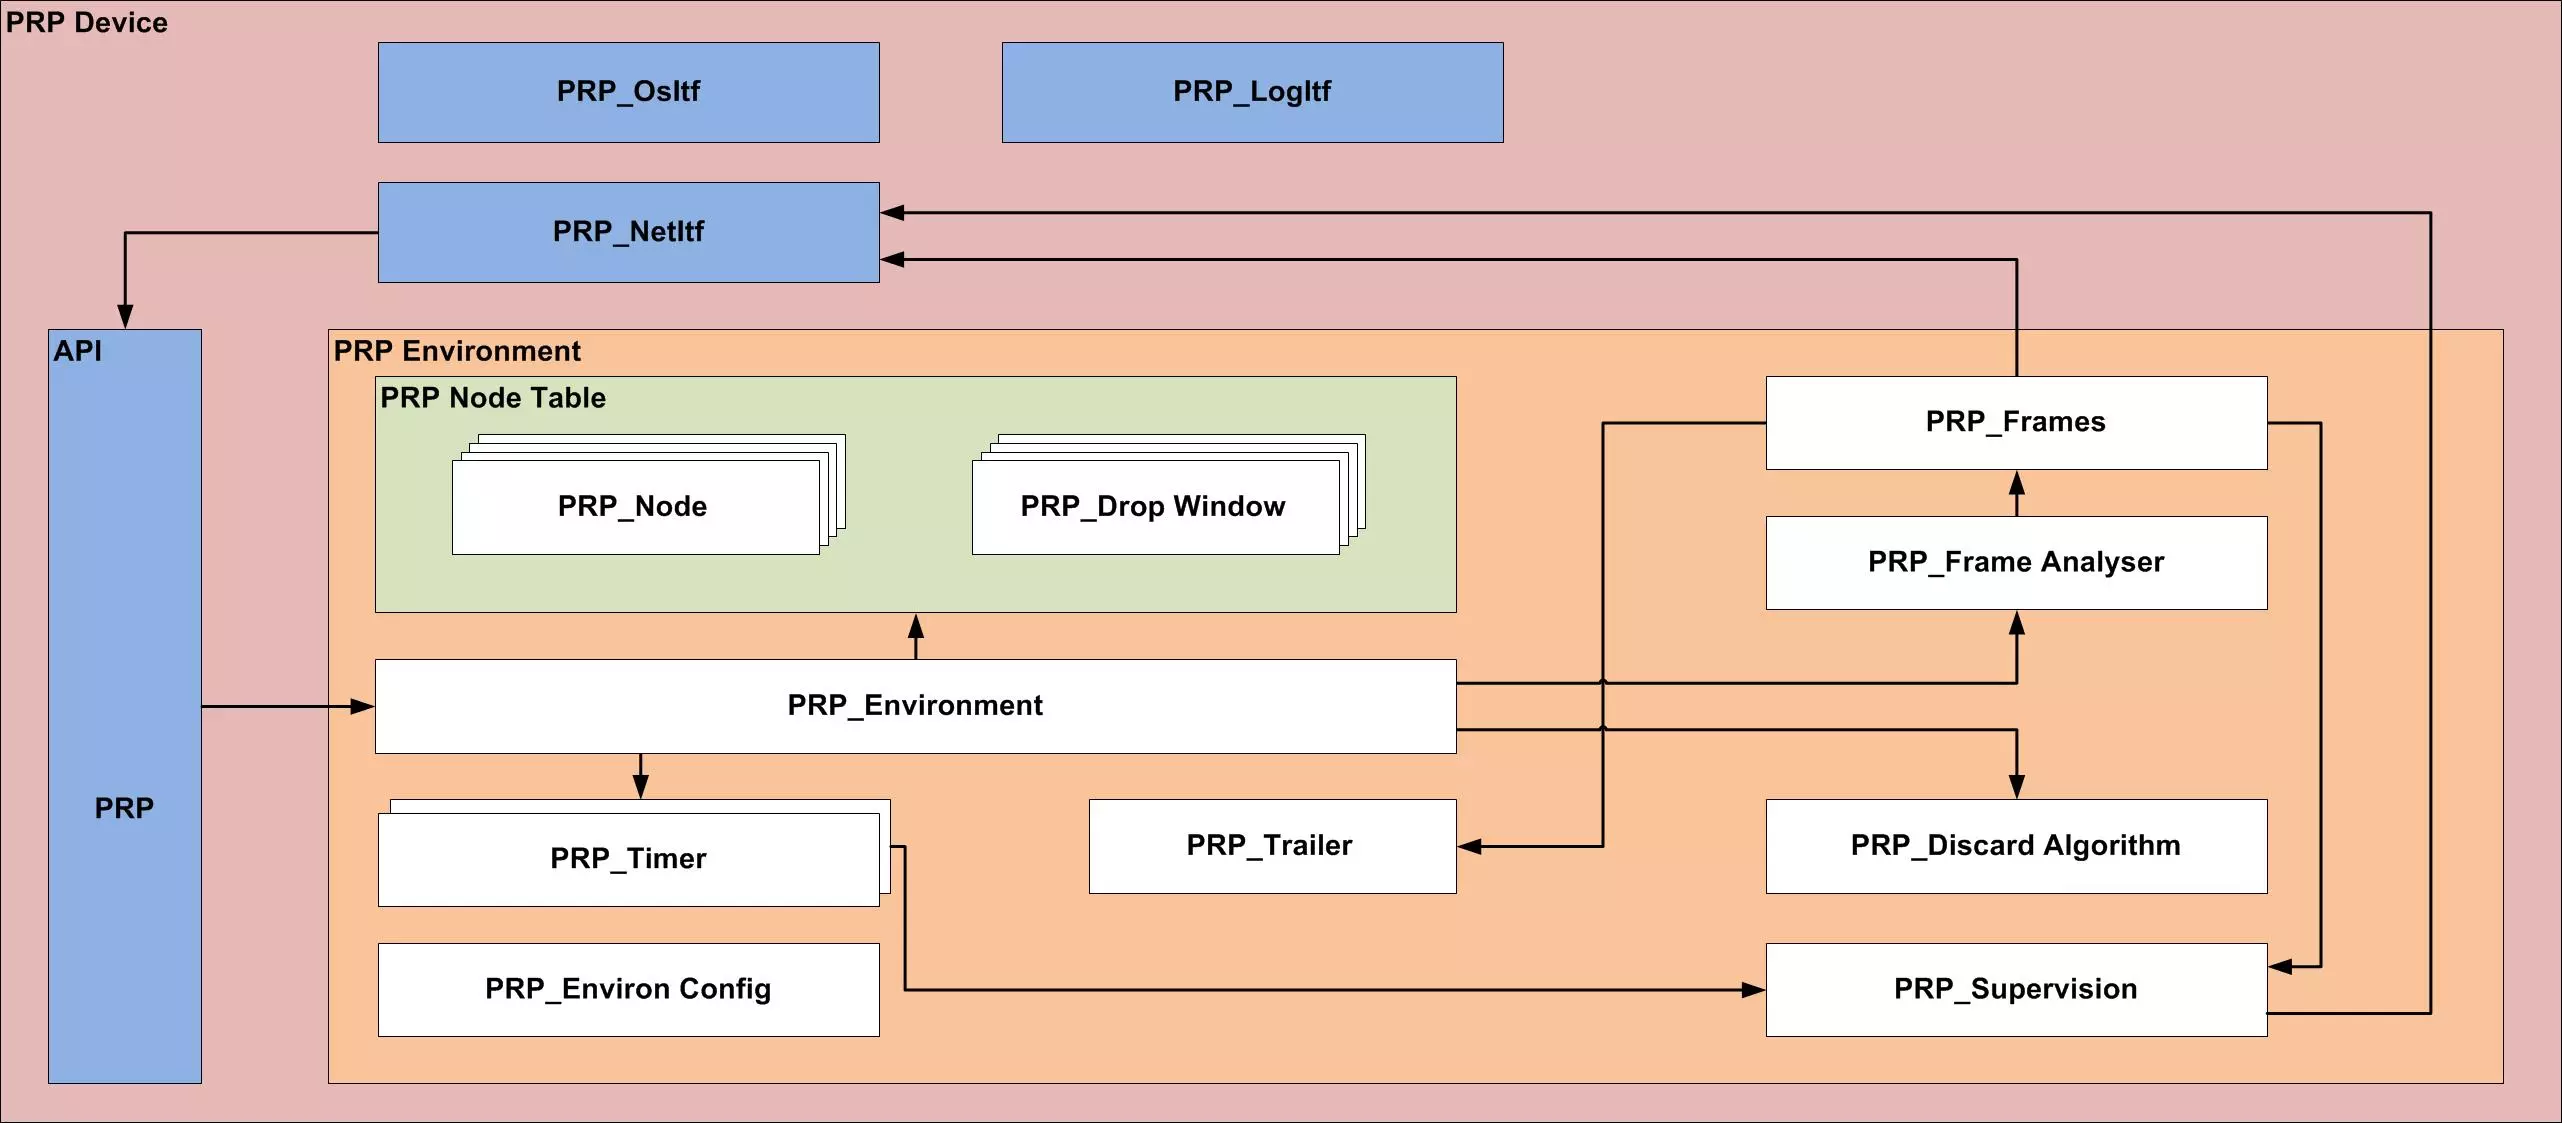 Structure of the PRP Software Stack